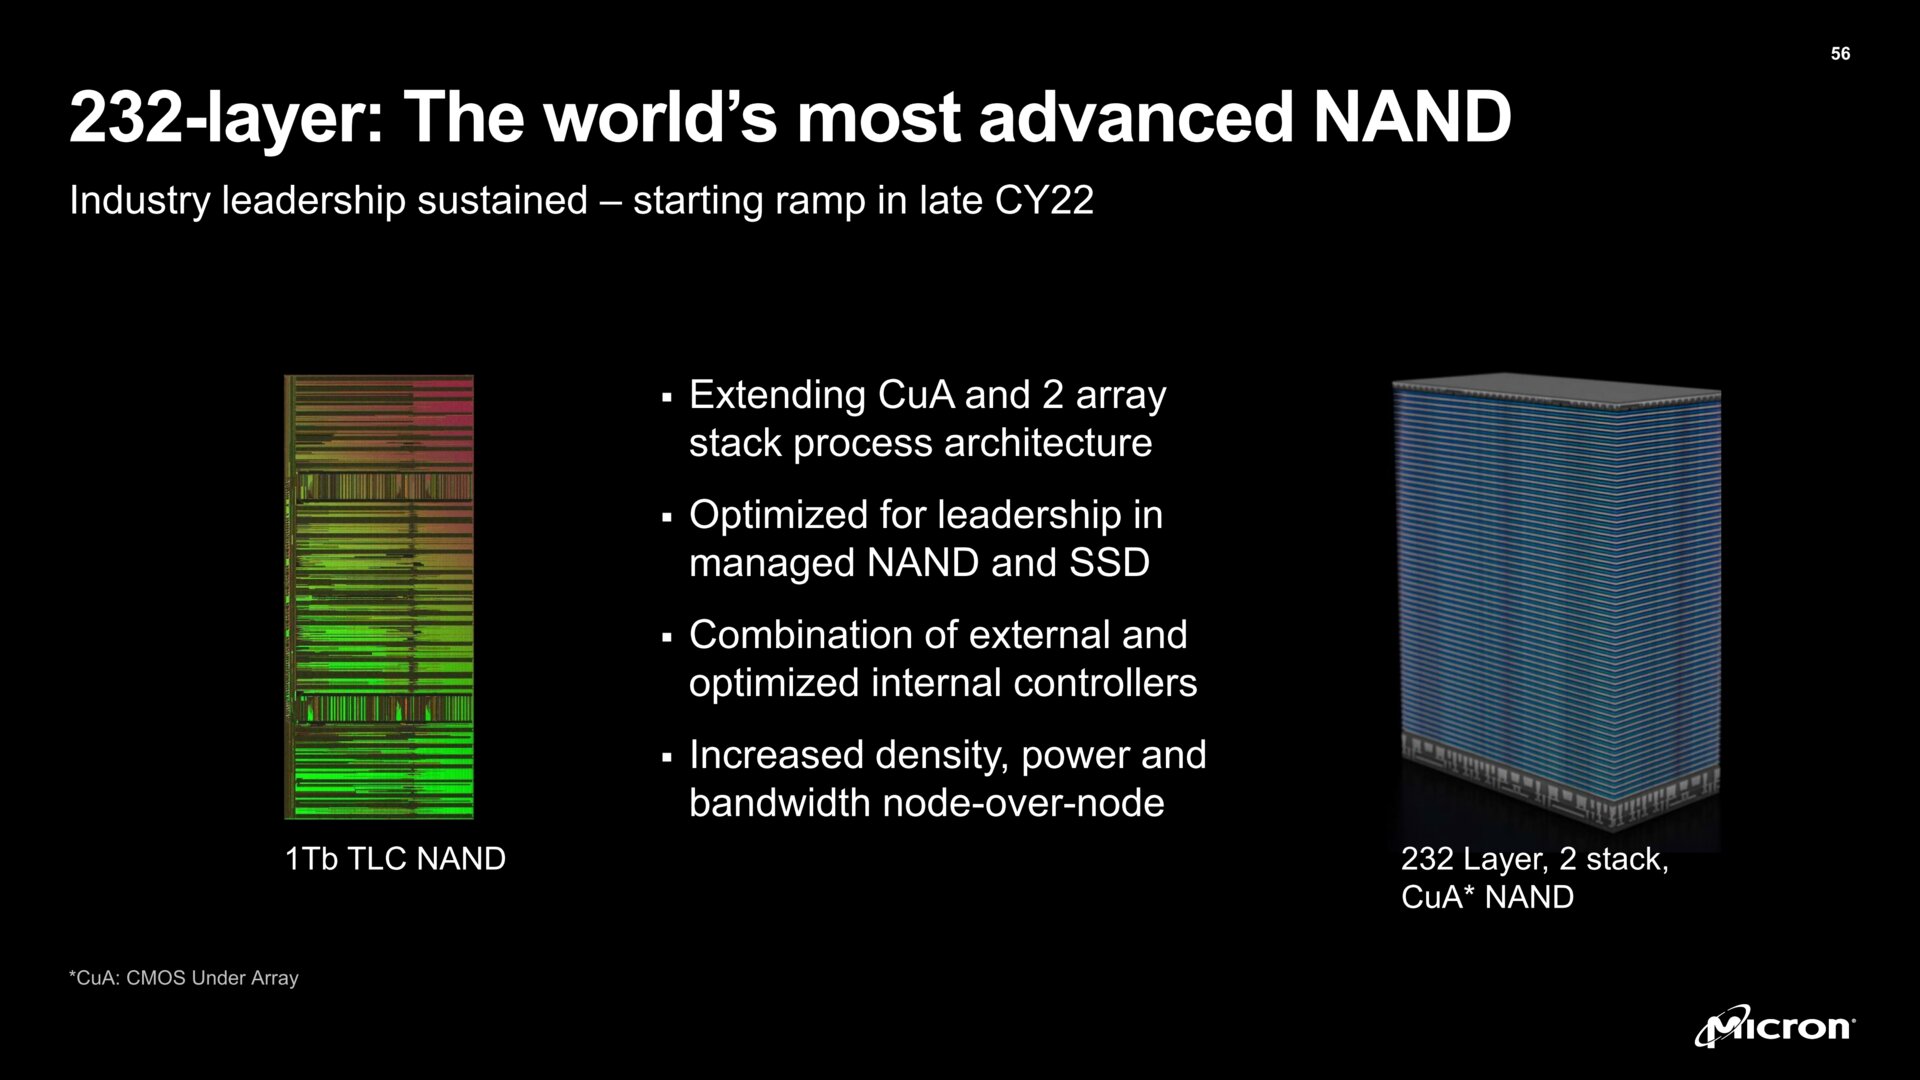 Microns neuer 232-Layer-NAND